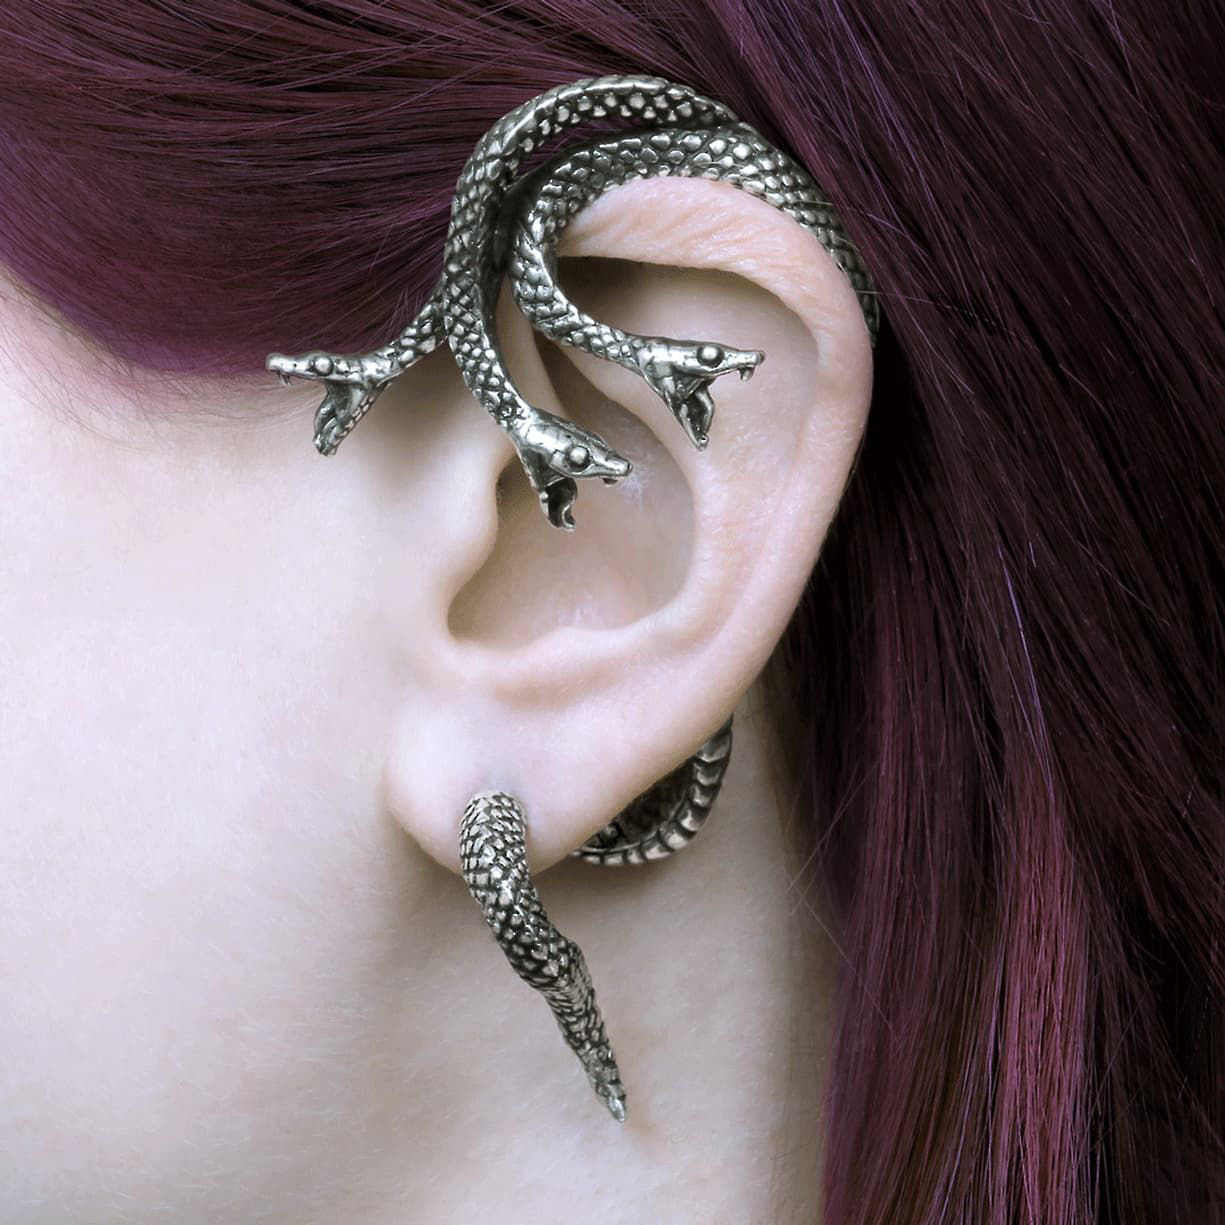 Khthonis Pewter Snake Ear Wrap for left ear of three-headed serpent with single tail curling around ear and going thru earlobe